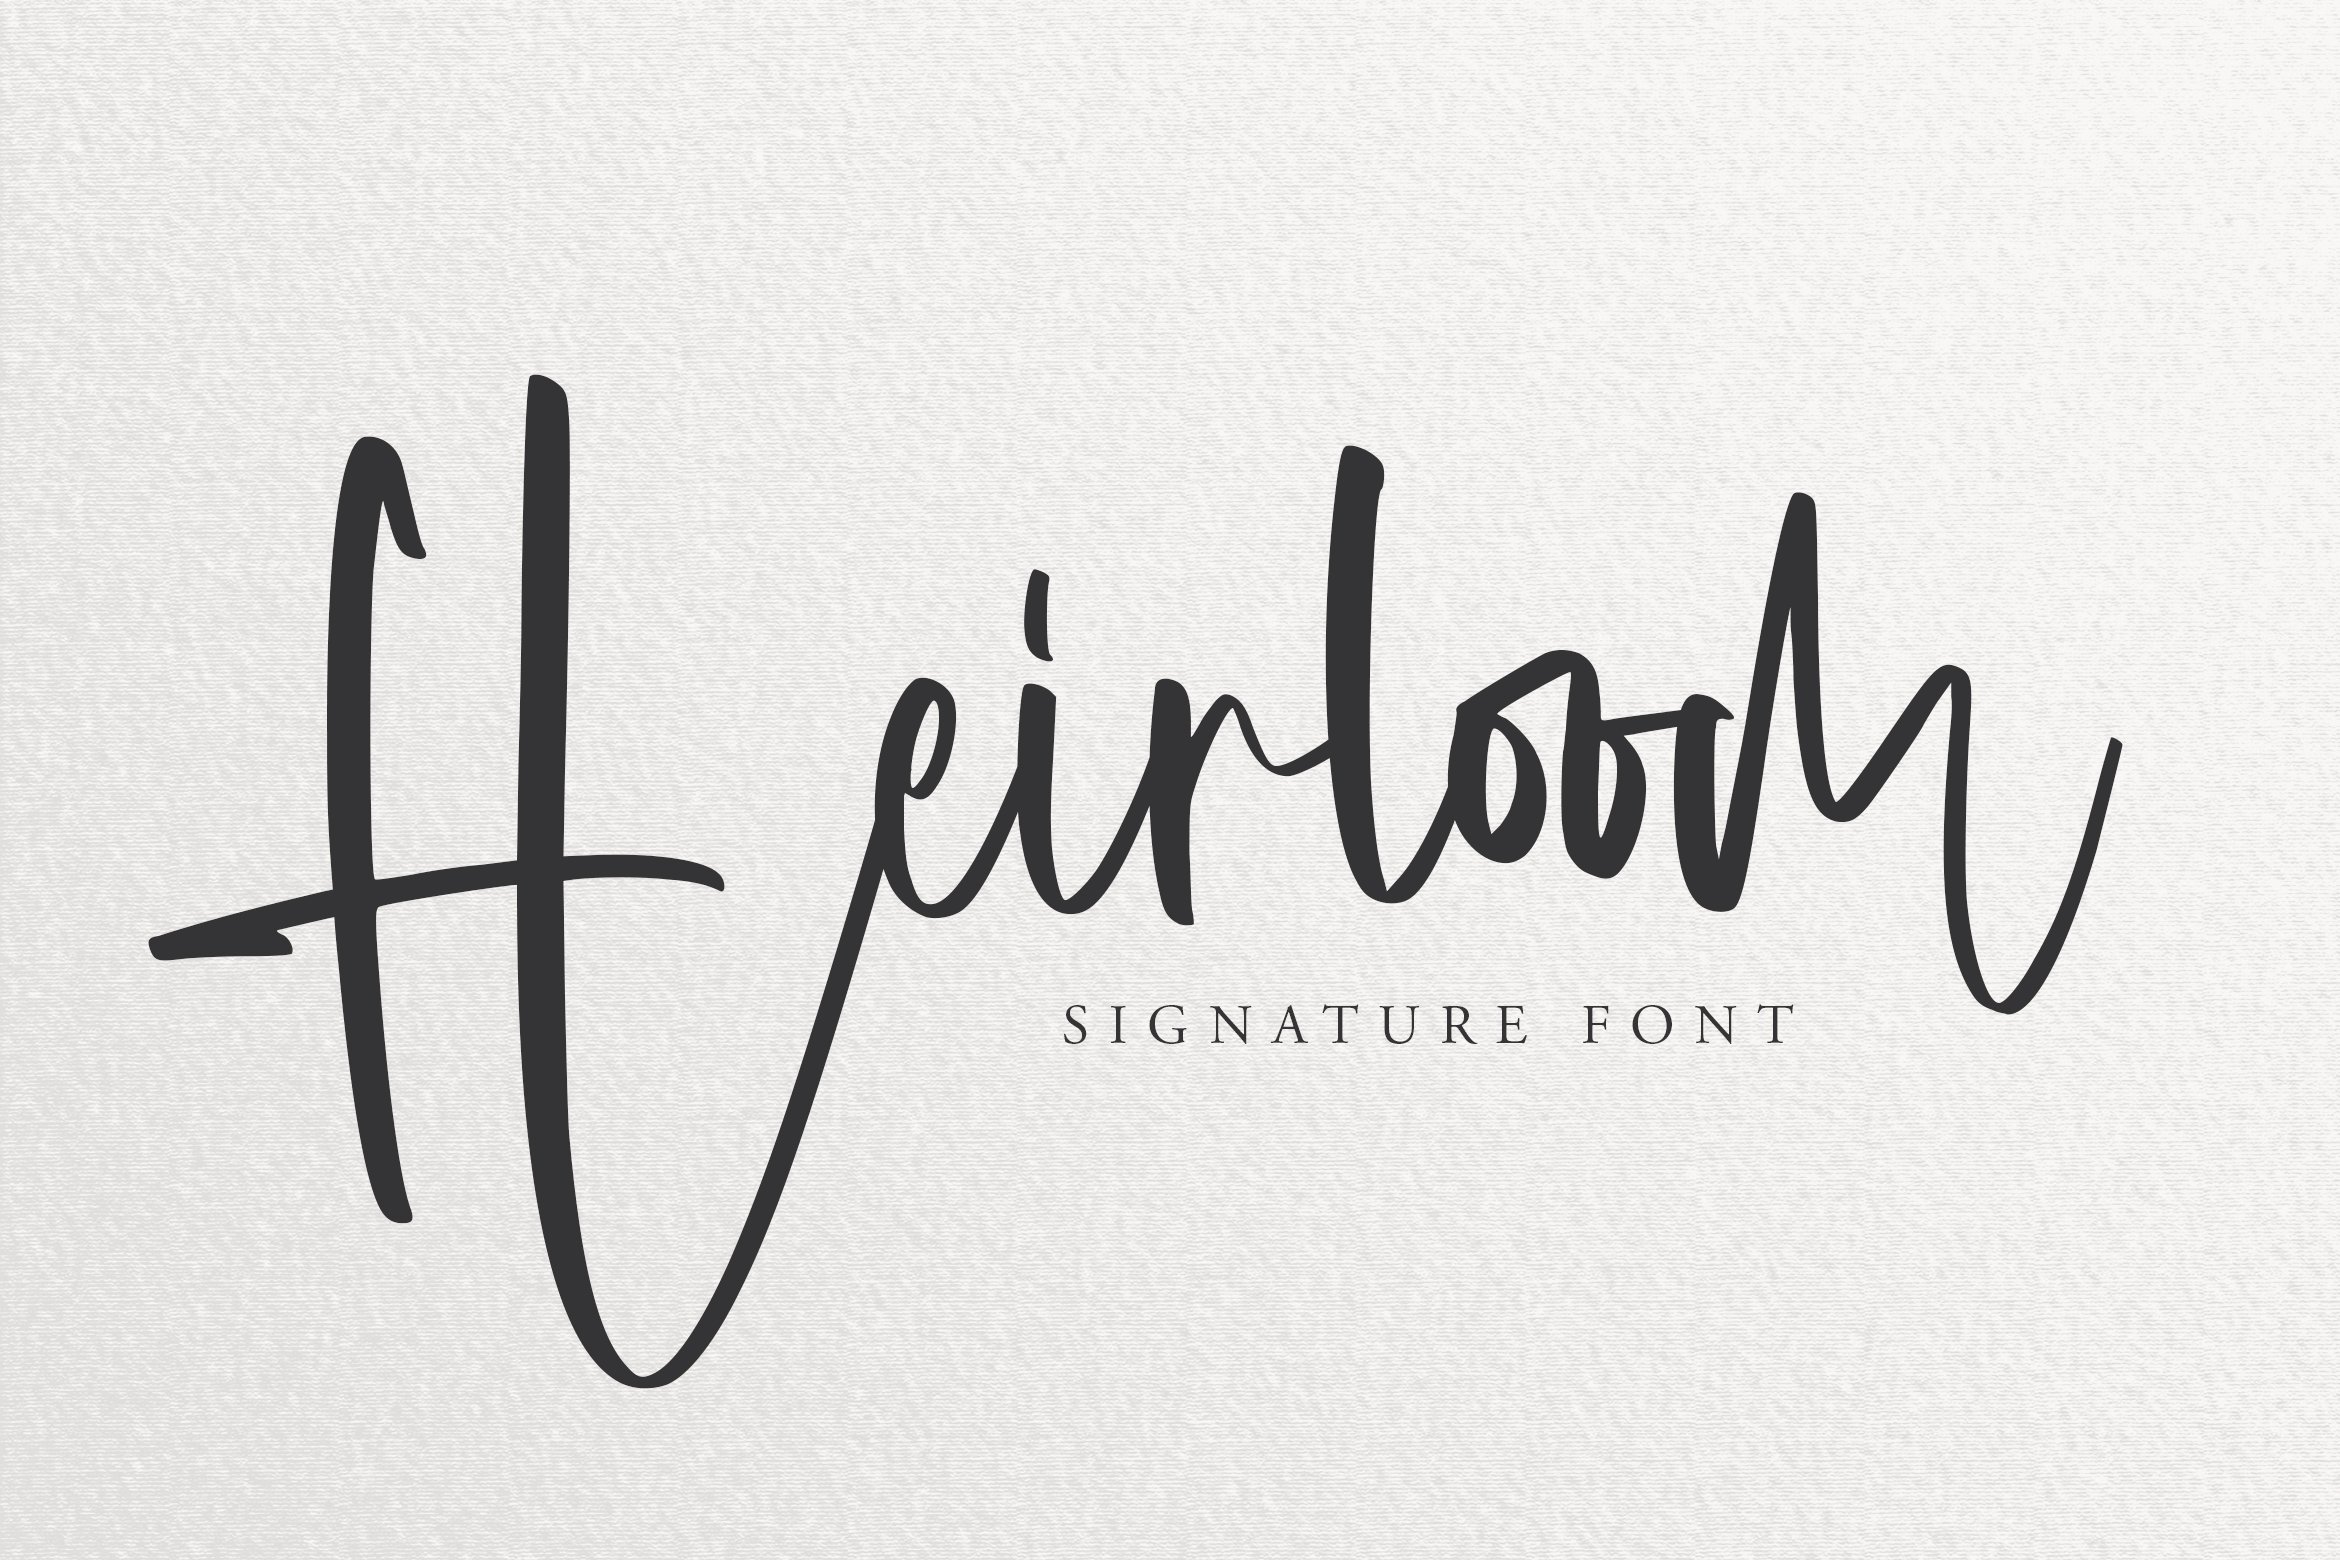 Heirloom - Signature Font cover image.